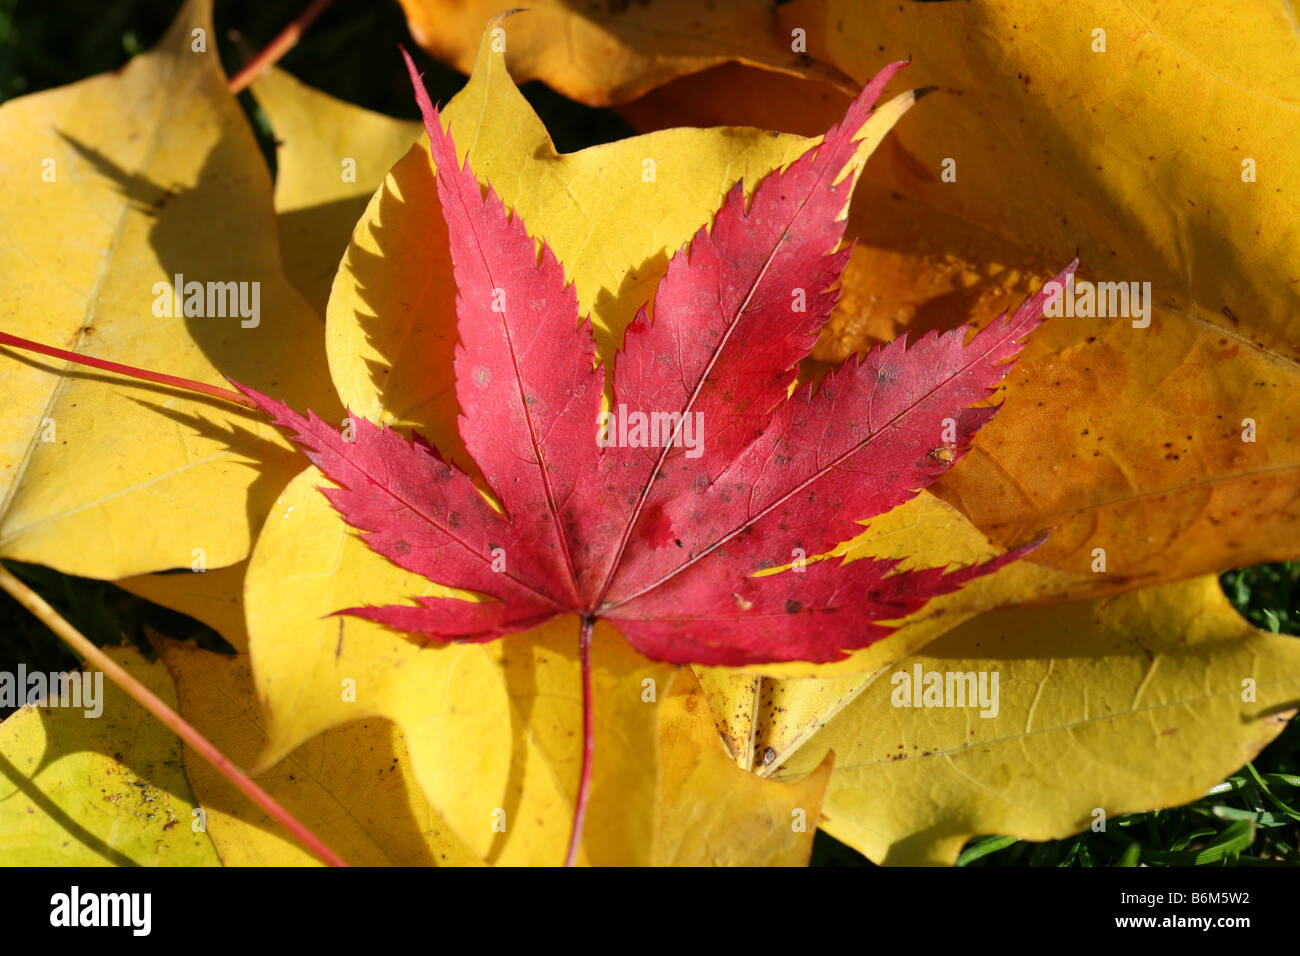 A red Maple or Acer leaf on a background of yellow Maple leaves Stock Photo